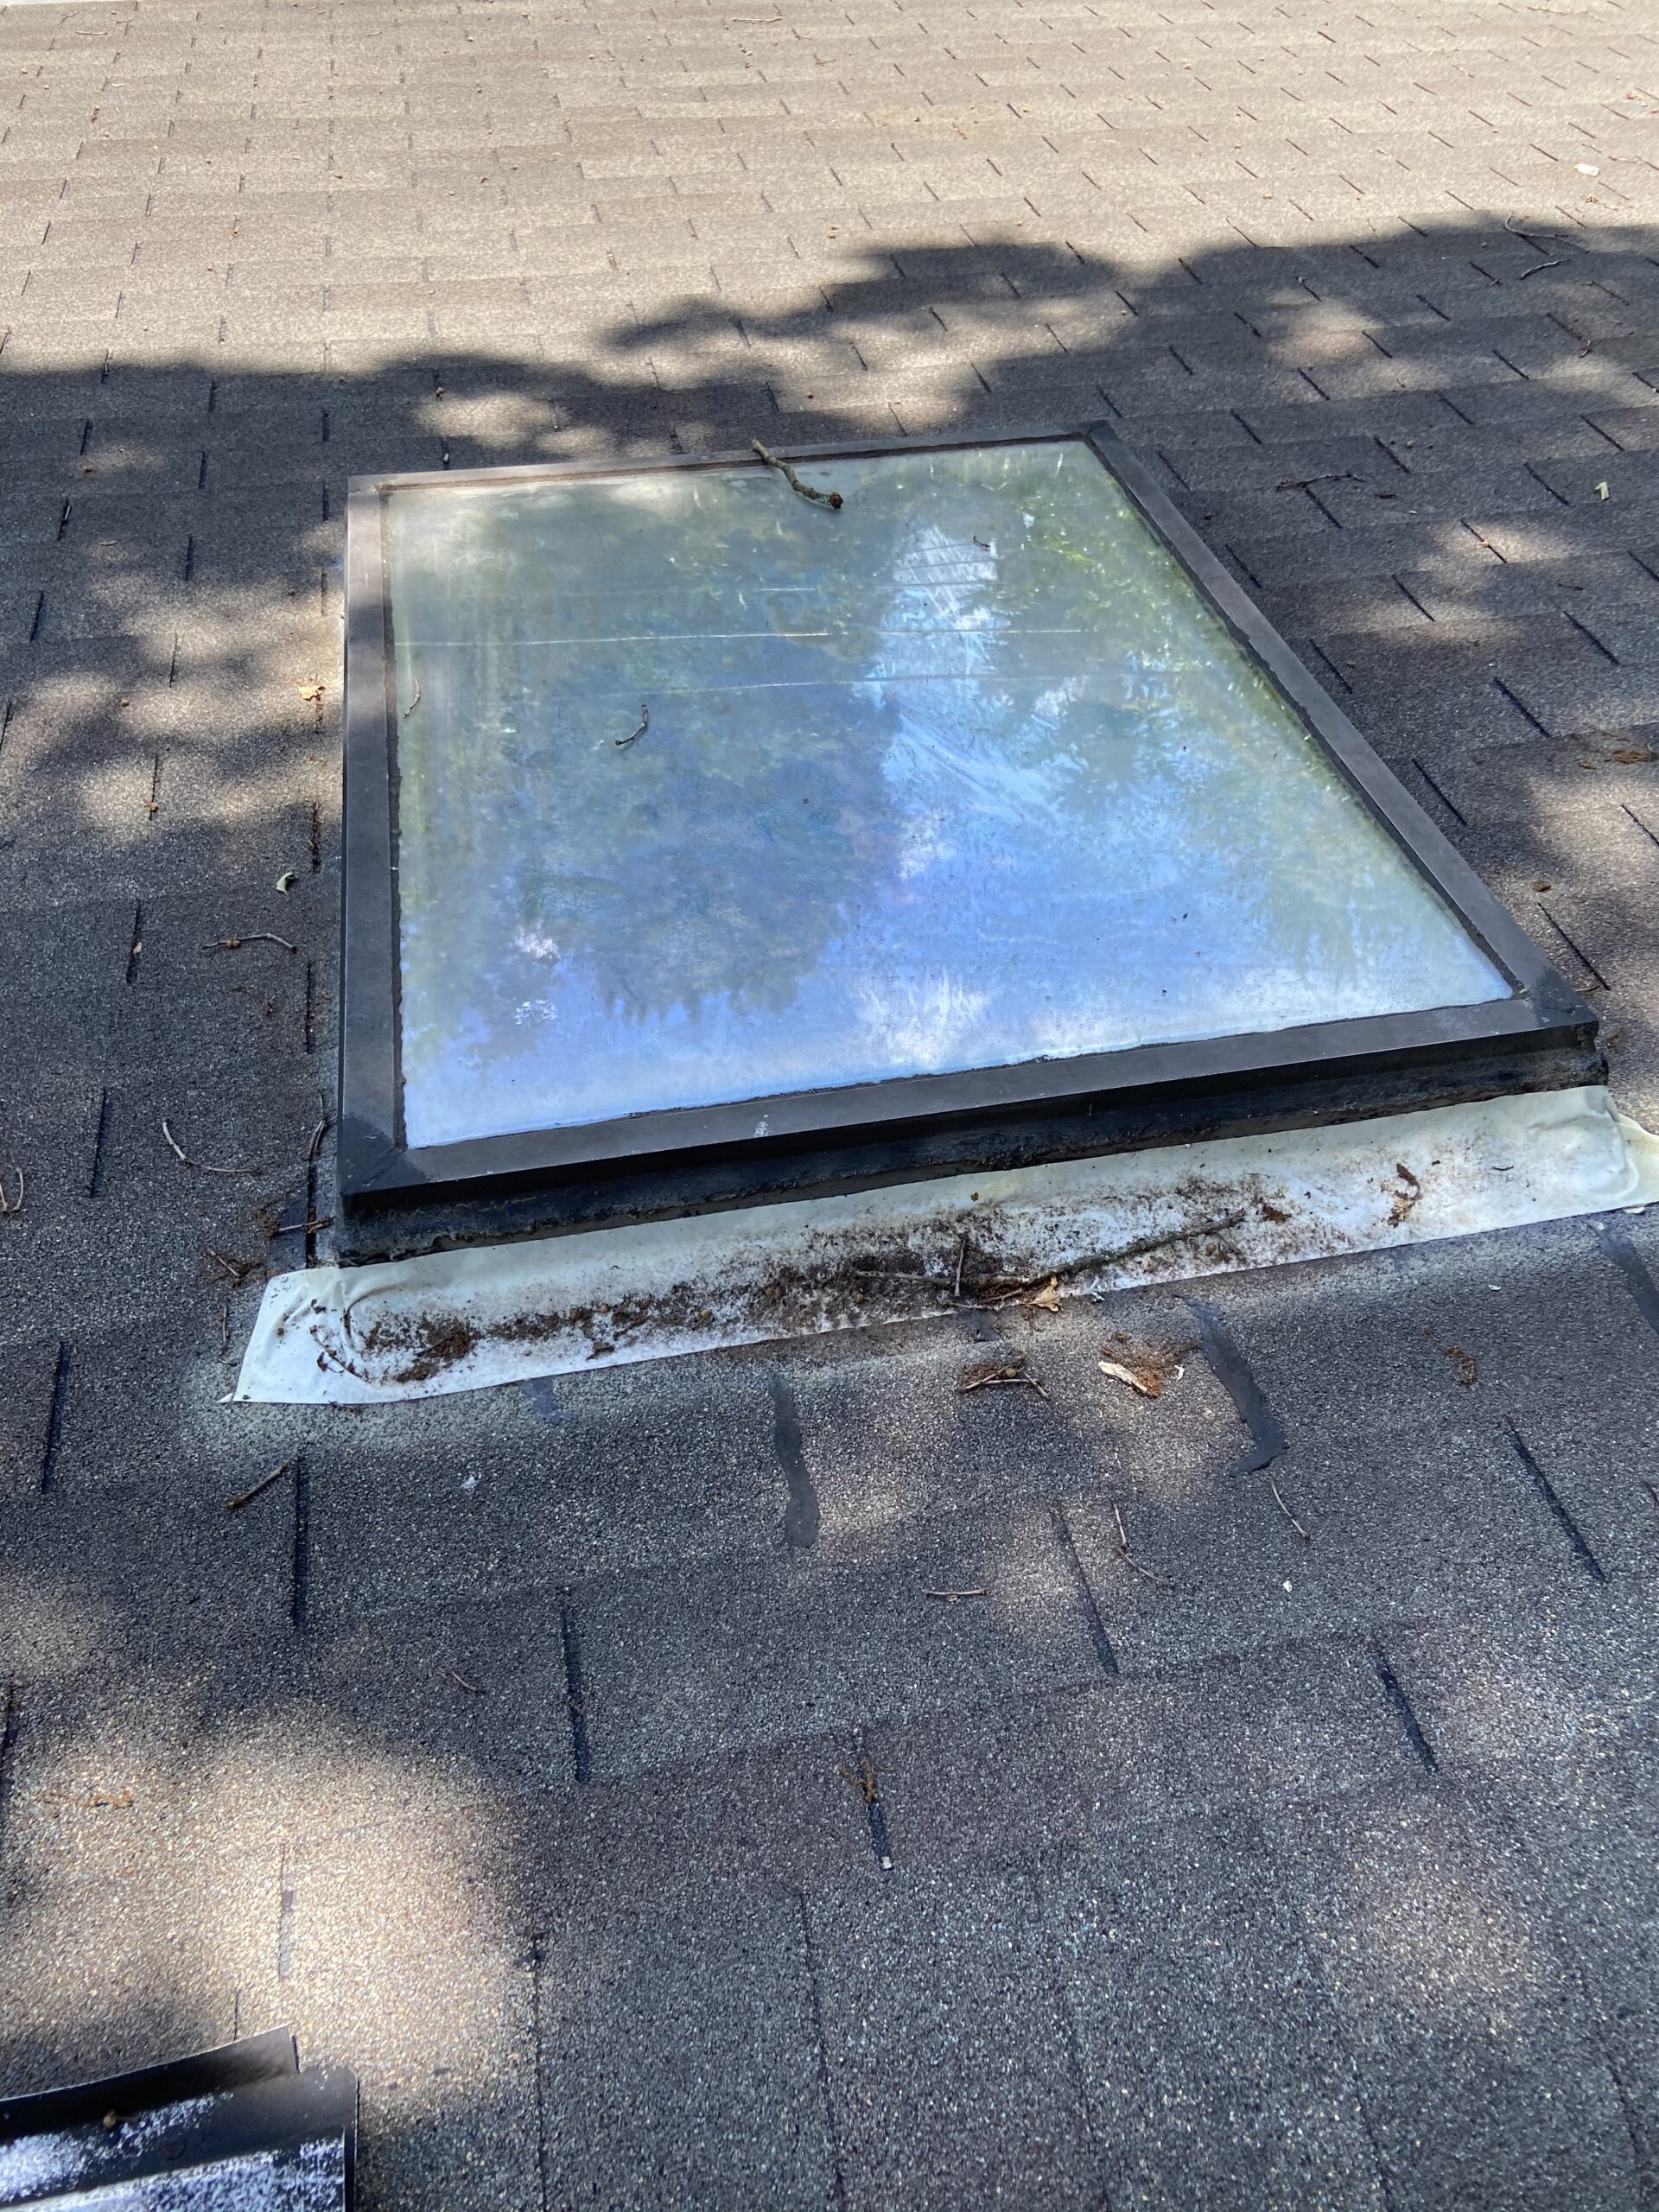 This is a before picture of the skylight when it is leaking